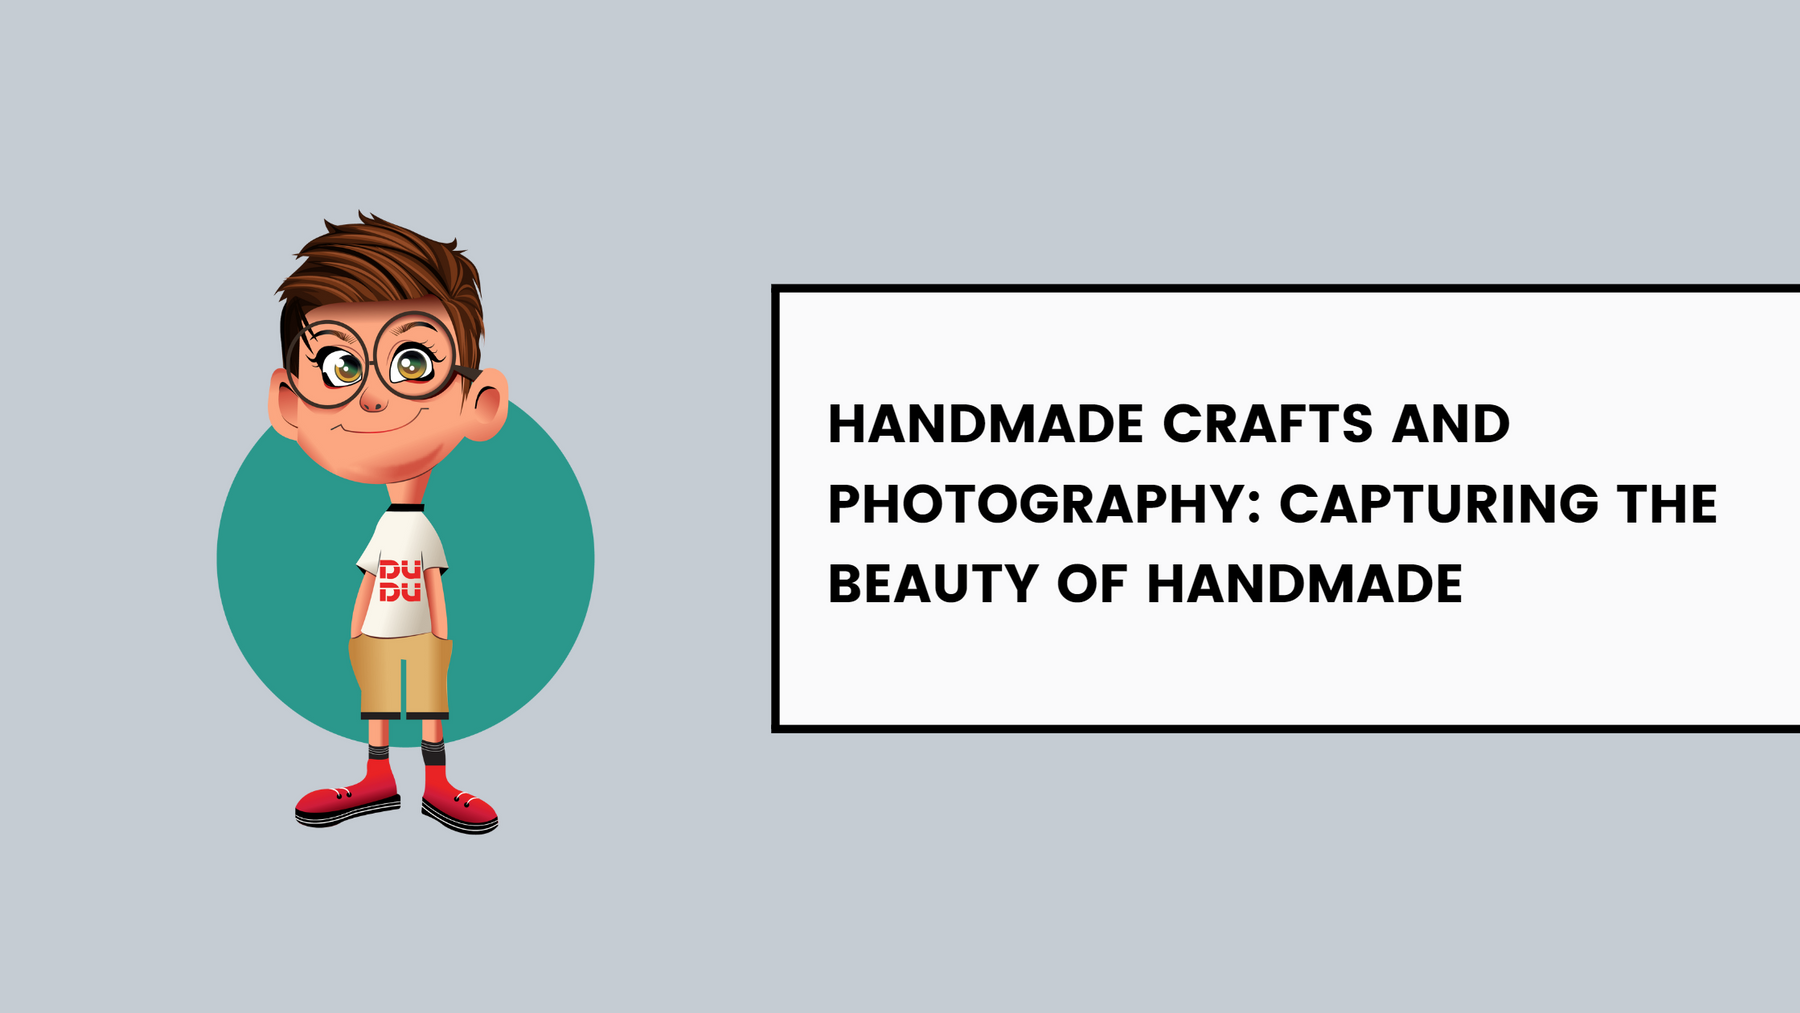 Handmade Crafts And Photography: Capturing The Beauty Of Handmade